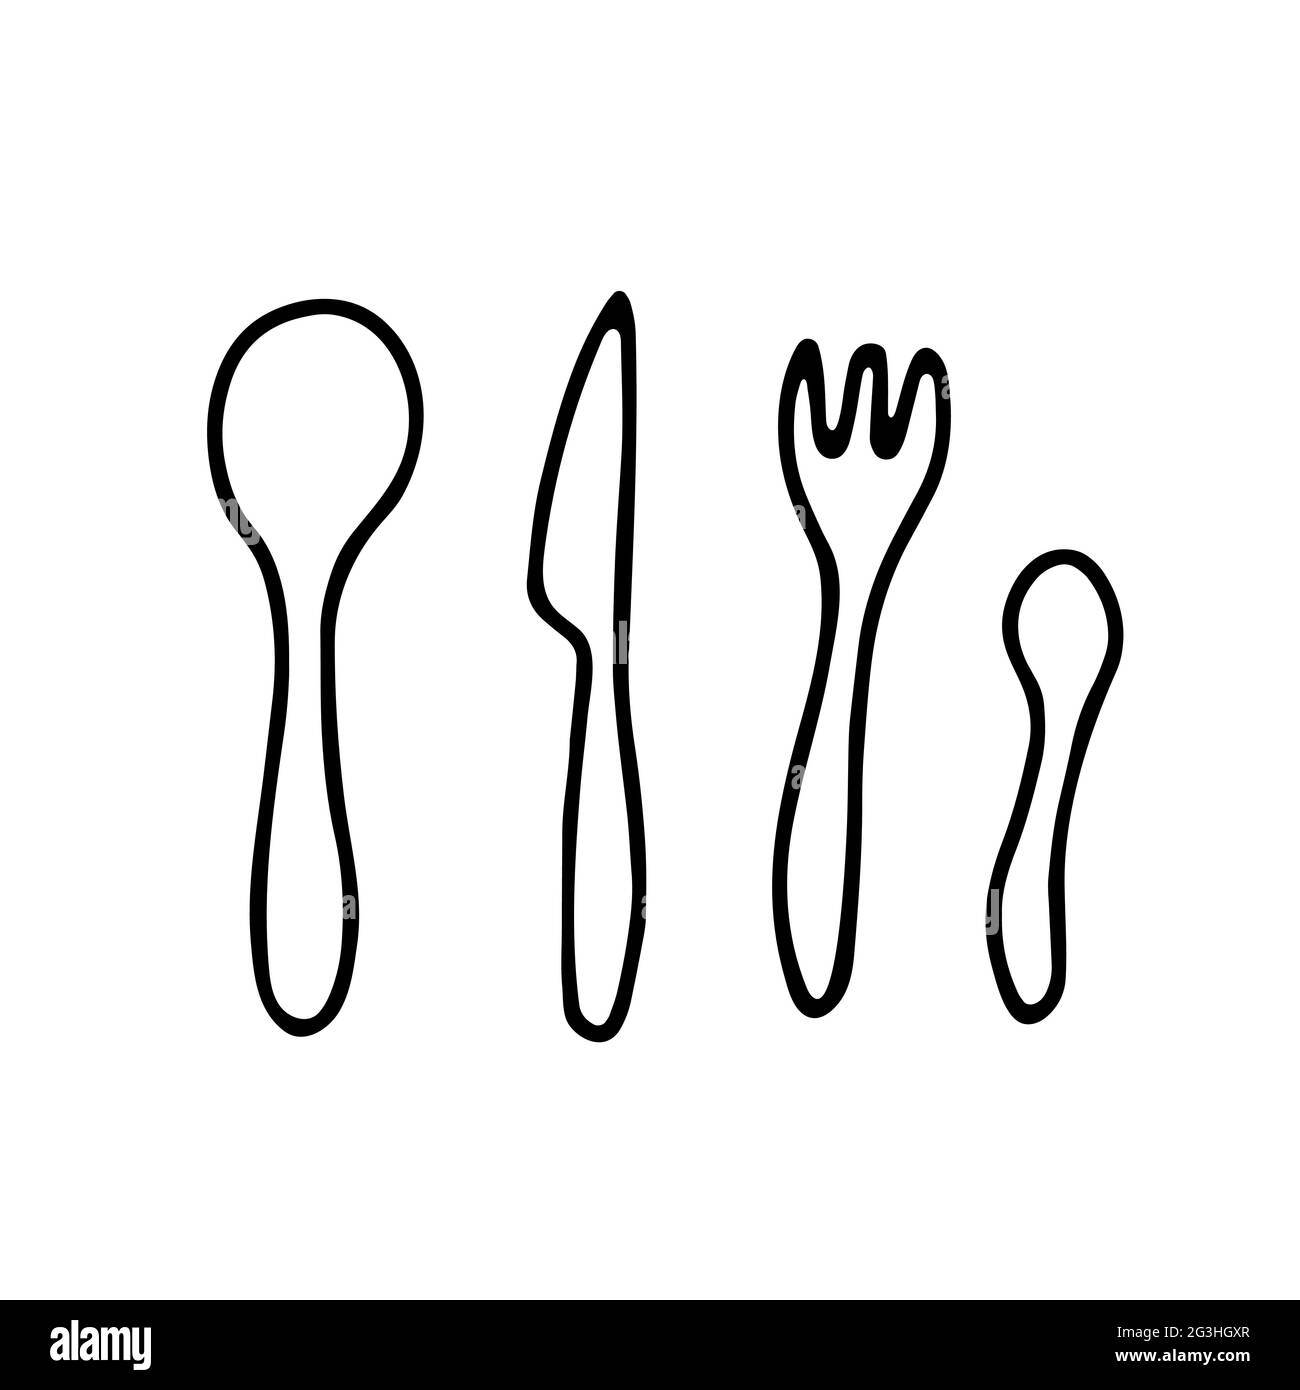 Doodle vector cutlery set. Outline spoon, fork, knife isolated on white background. Cozy kitchen utensils, cute kitchenware, dishes for dinner, lunch. Stock Vector